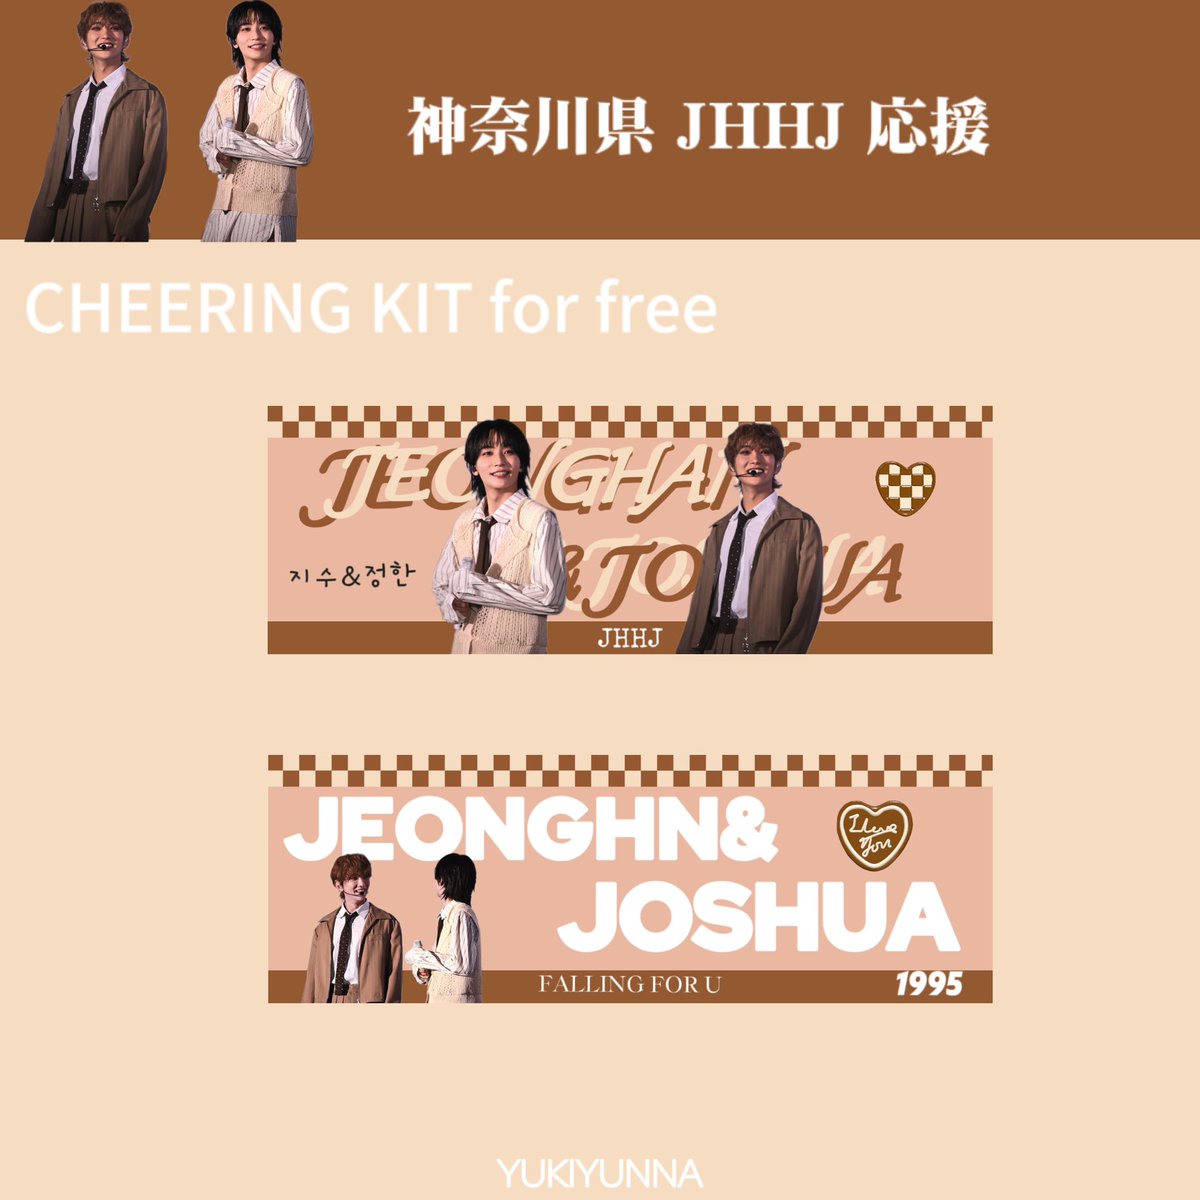 2024 FOLLOW AGAIN free Cheering kit for #ジョンハン #ジョシュア 🐰526 50pieces 🦌The location of the gift will be announced on X on the same day. （Jihan money provided by my friend will also be distributed at the same time. #정한 #조슈아 #JEONGHAN #JOSHUA